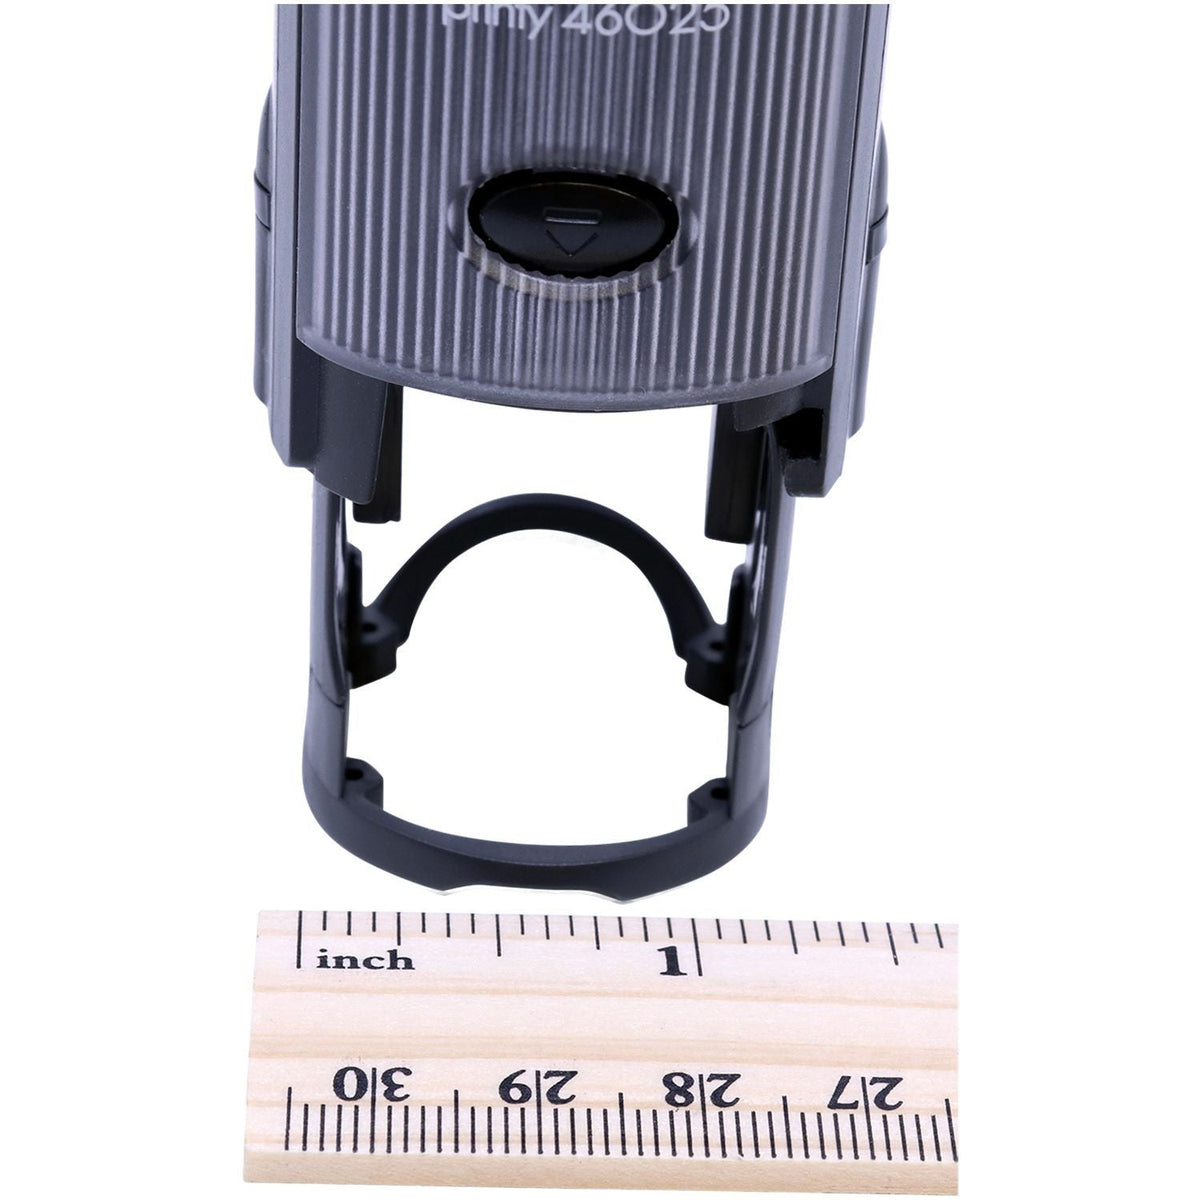 Measurment of Self-Inking Round COD Stamp with Ruler